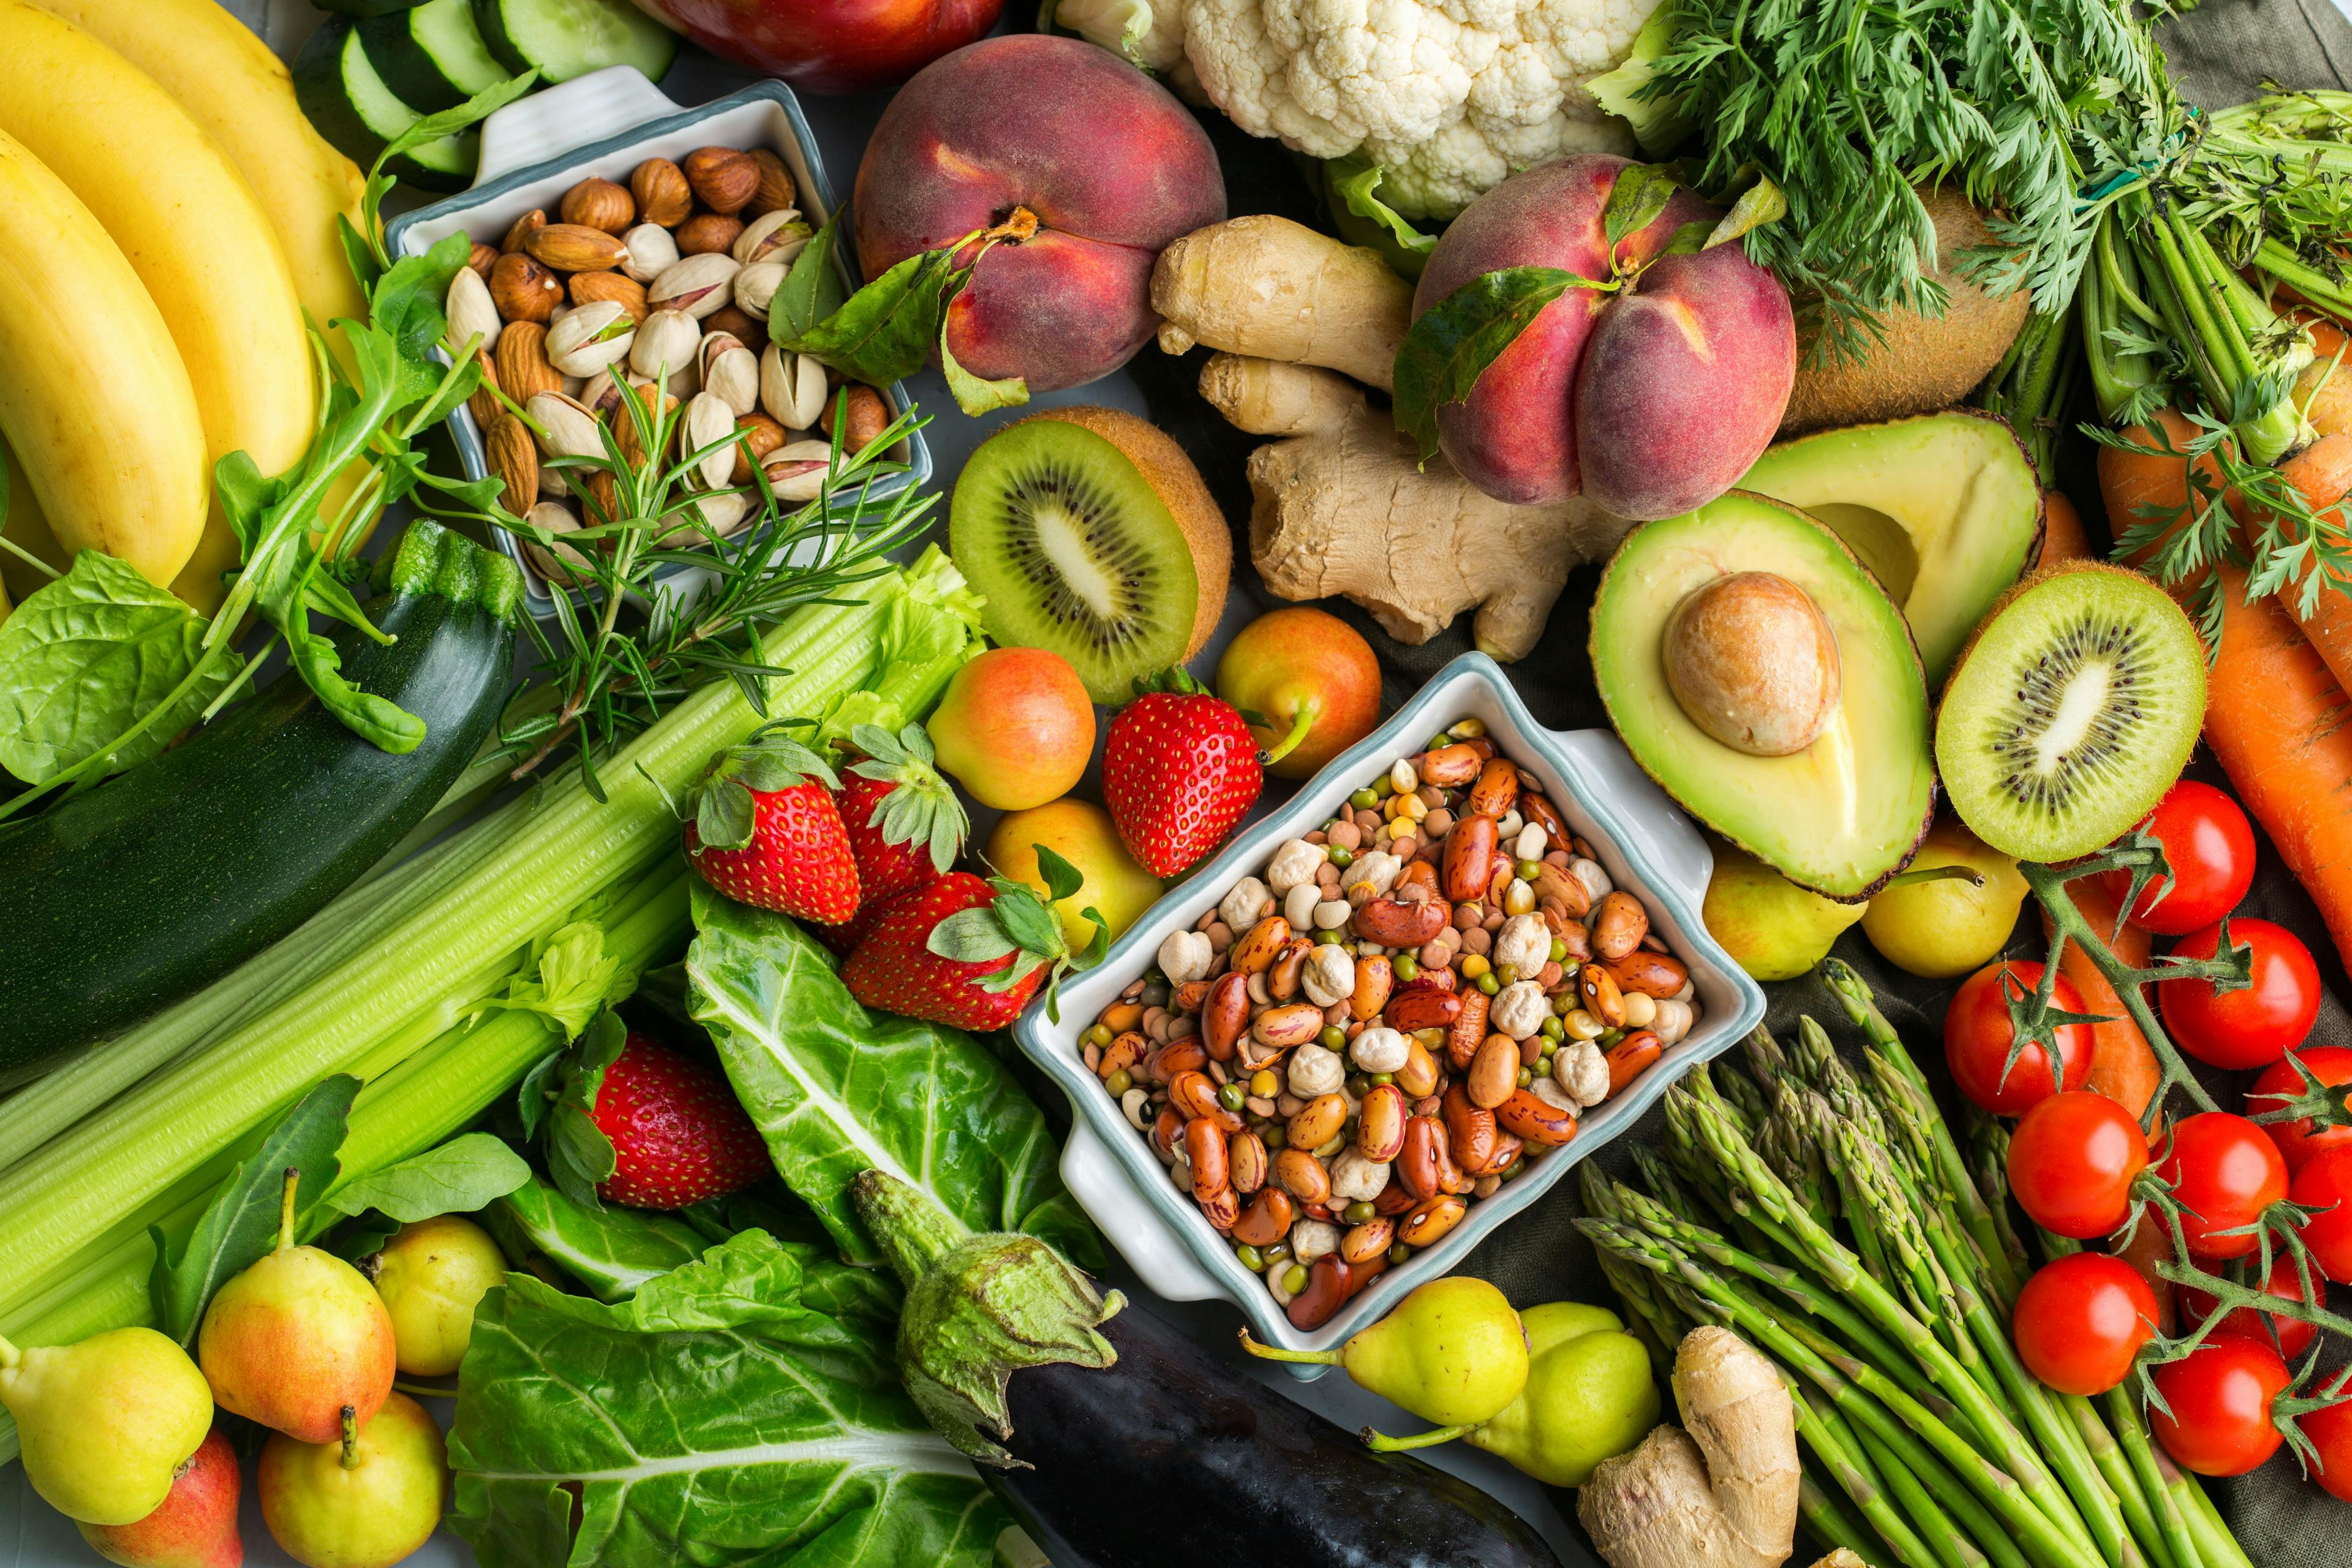 Vegetarian Diet May Significantly Improve Cardiometabolic Outcomes in Those with High Cardiovascular Risk